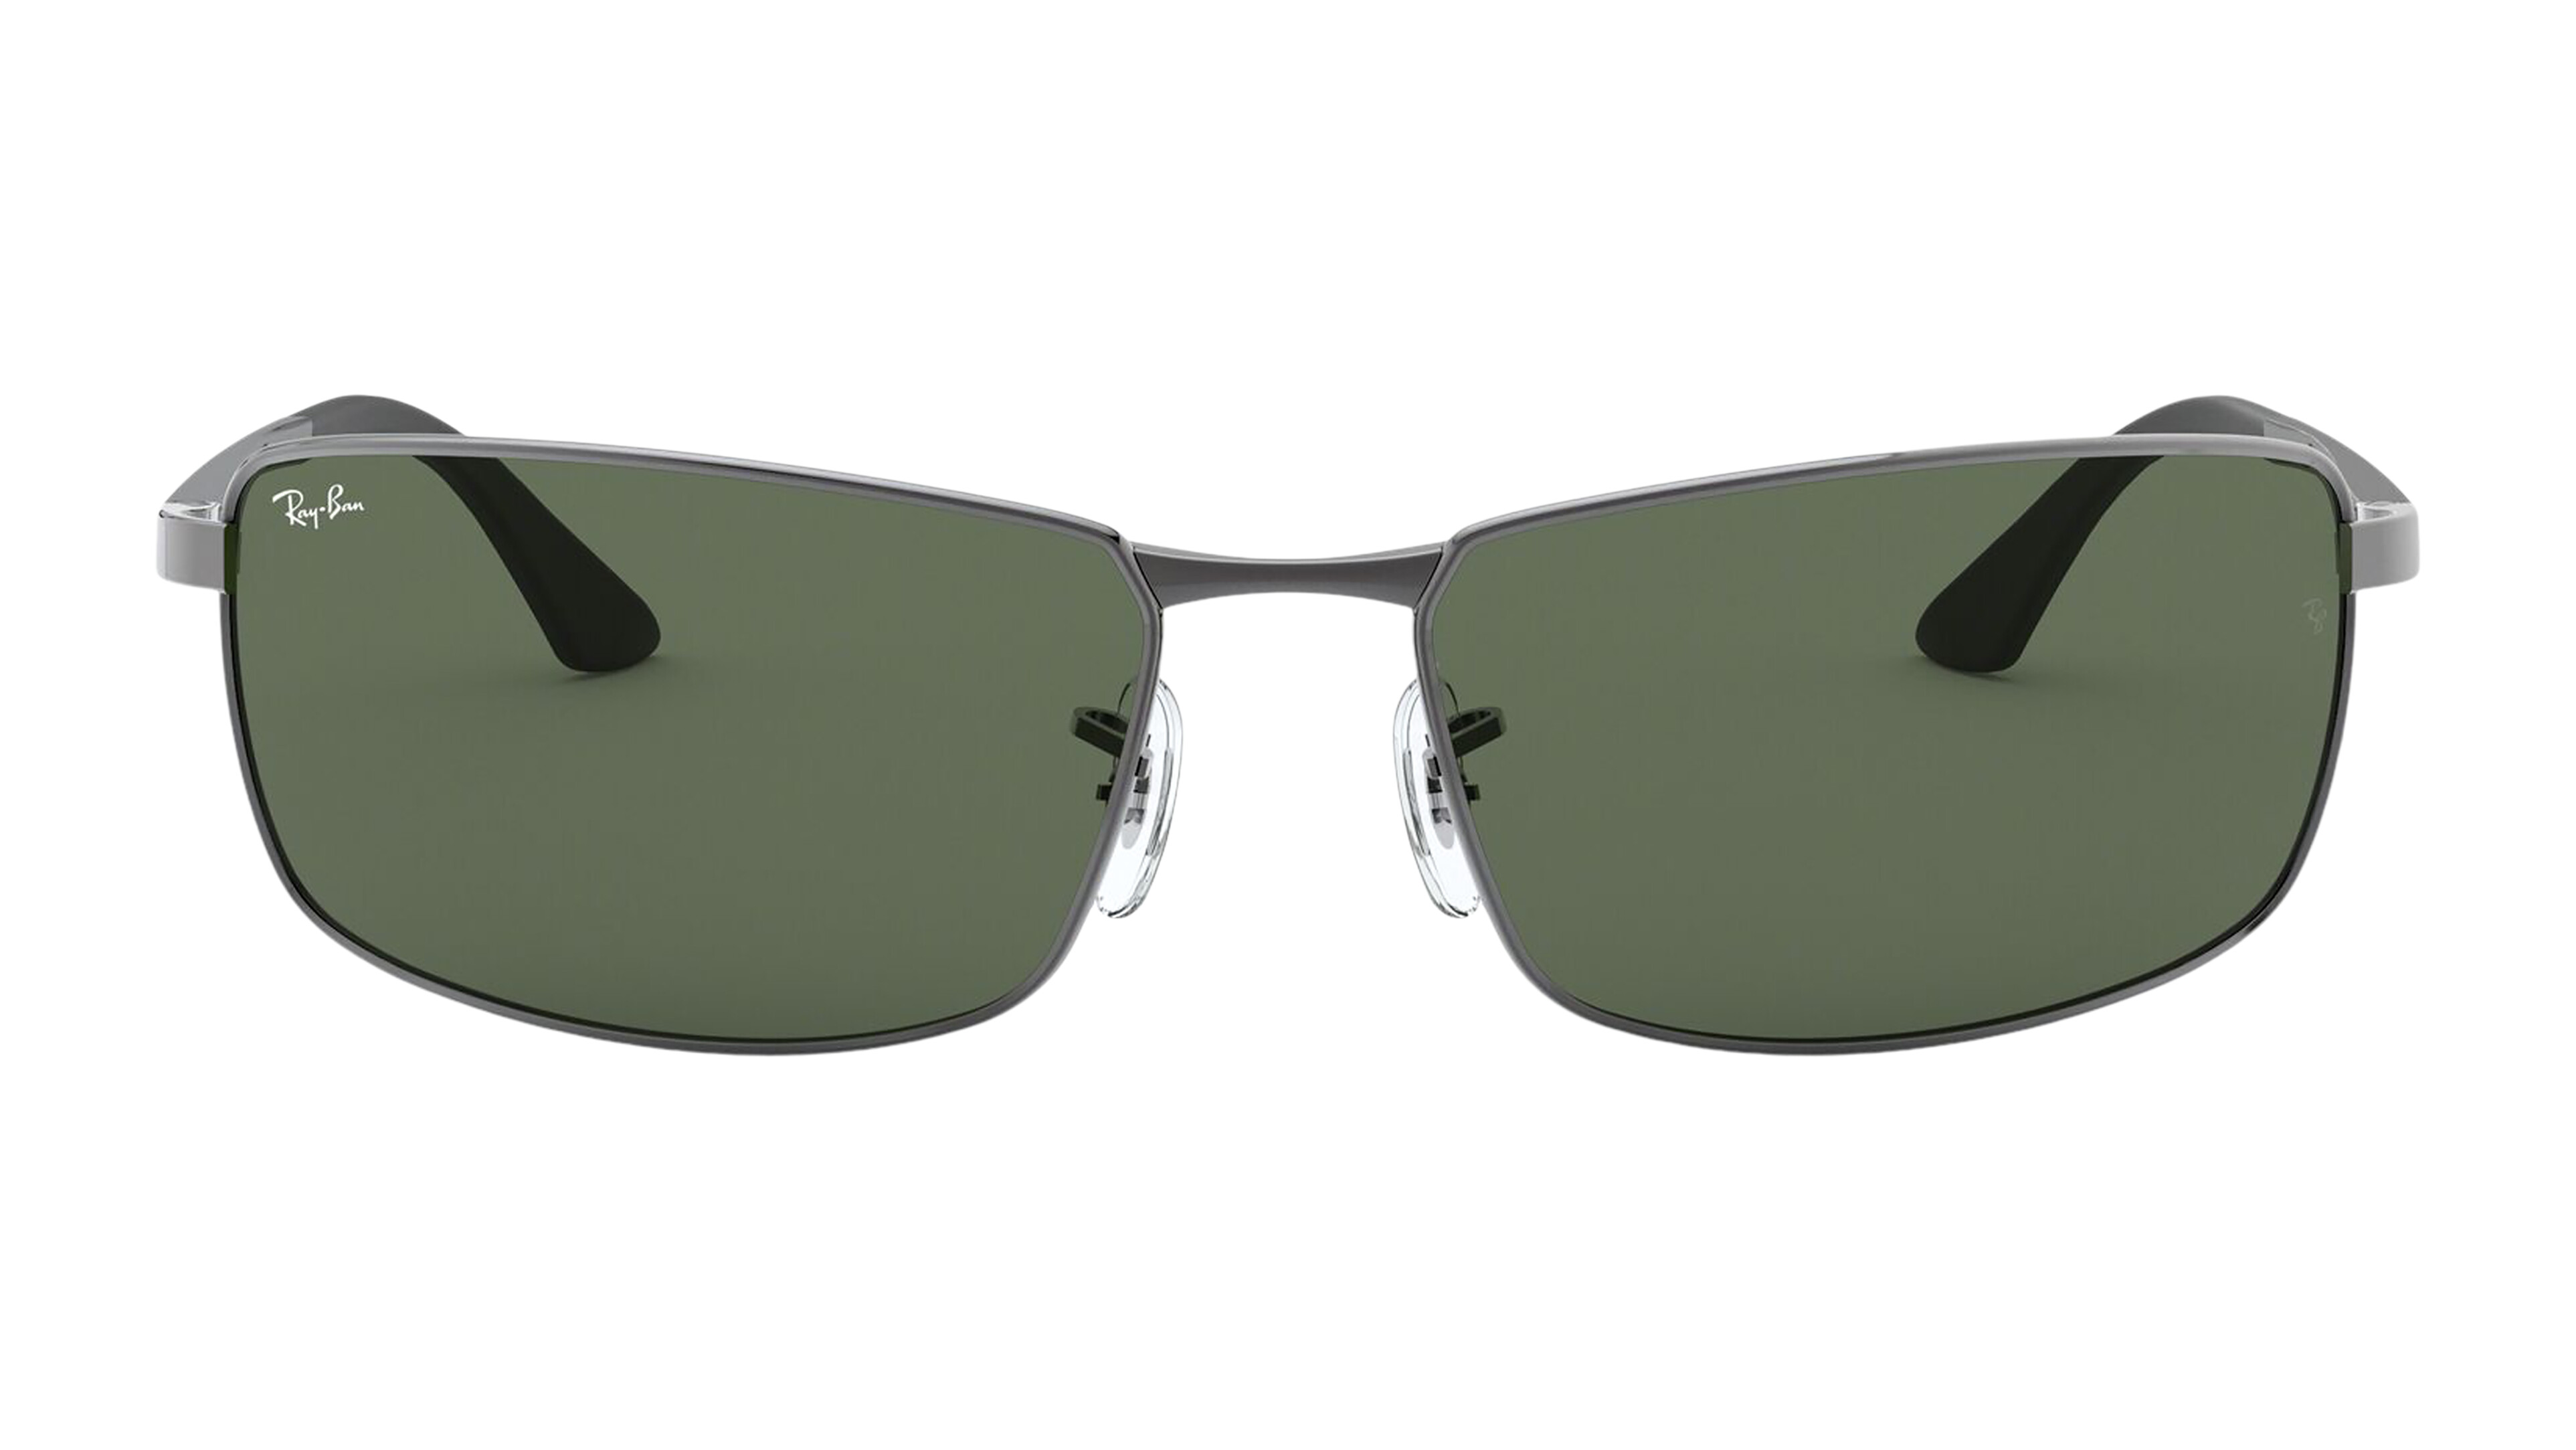 [products.image.front] Ray-Ban N/A 0RB3498 004/71 Sonnenbrille